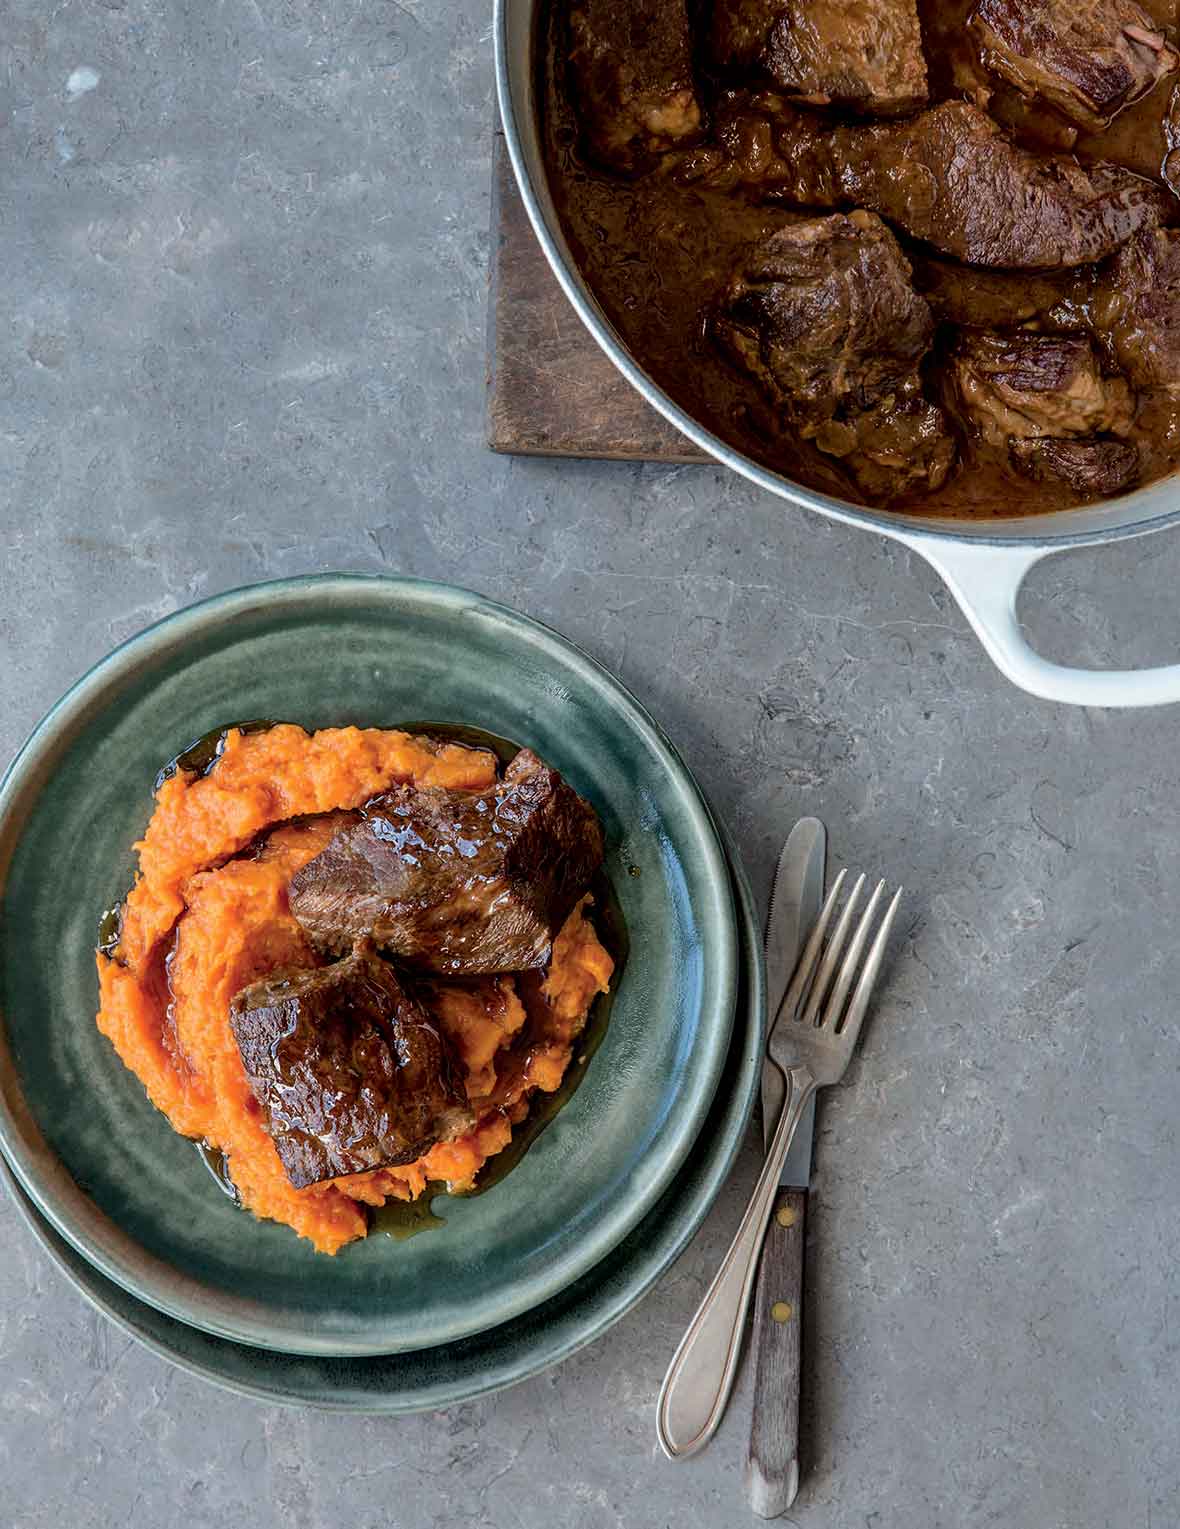 A green plate containing sweet potato puree, topped with 2 pieces of short rib. A Dutch oven is beside the bowl with more short ribs.